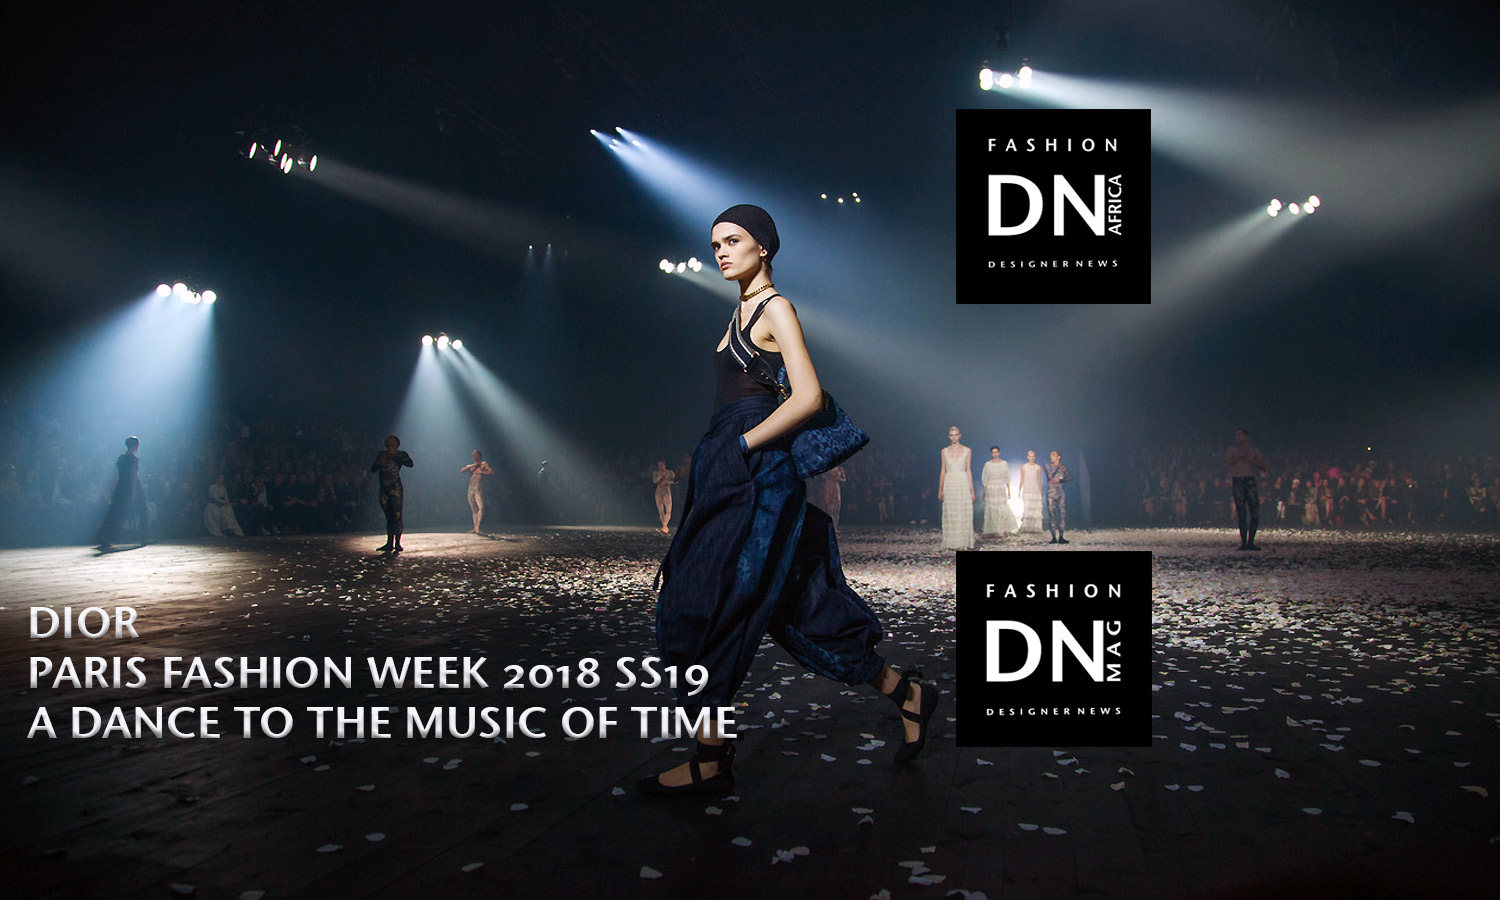 AFRICAN FASHION STYLE MAGAZINE -DIOR-PARIS-FASHION-WEEK-2018-SS19-A-DANCE-TO-THE-MUSIC-OF-TIME-by-Tony-GLENVILLE-for-DN-MAG.FR - Media Partner DN MAG, DN AFRICA -STUDIO 24 NIGERIA - STUDIO 24 INTERNATIONAL